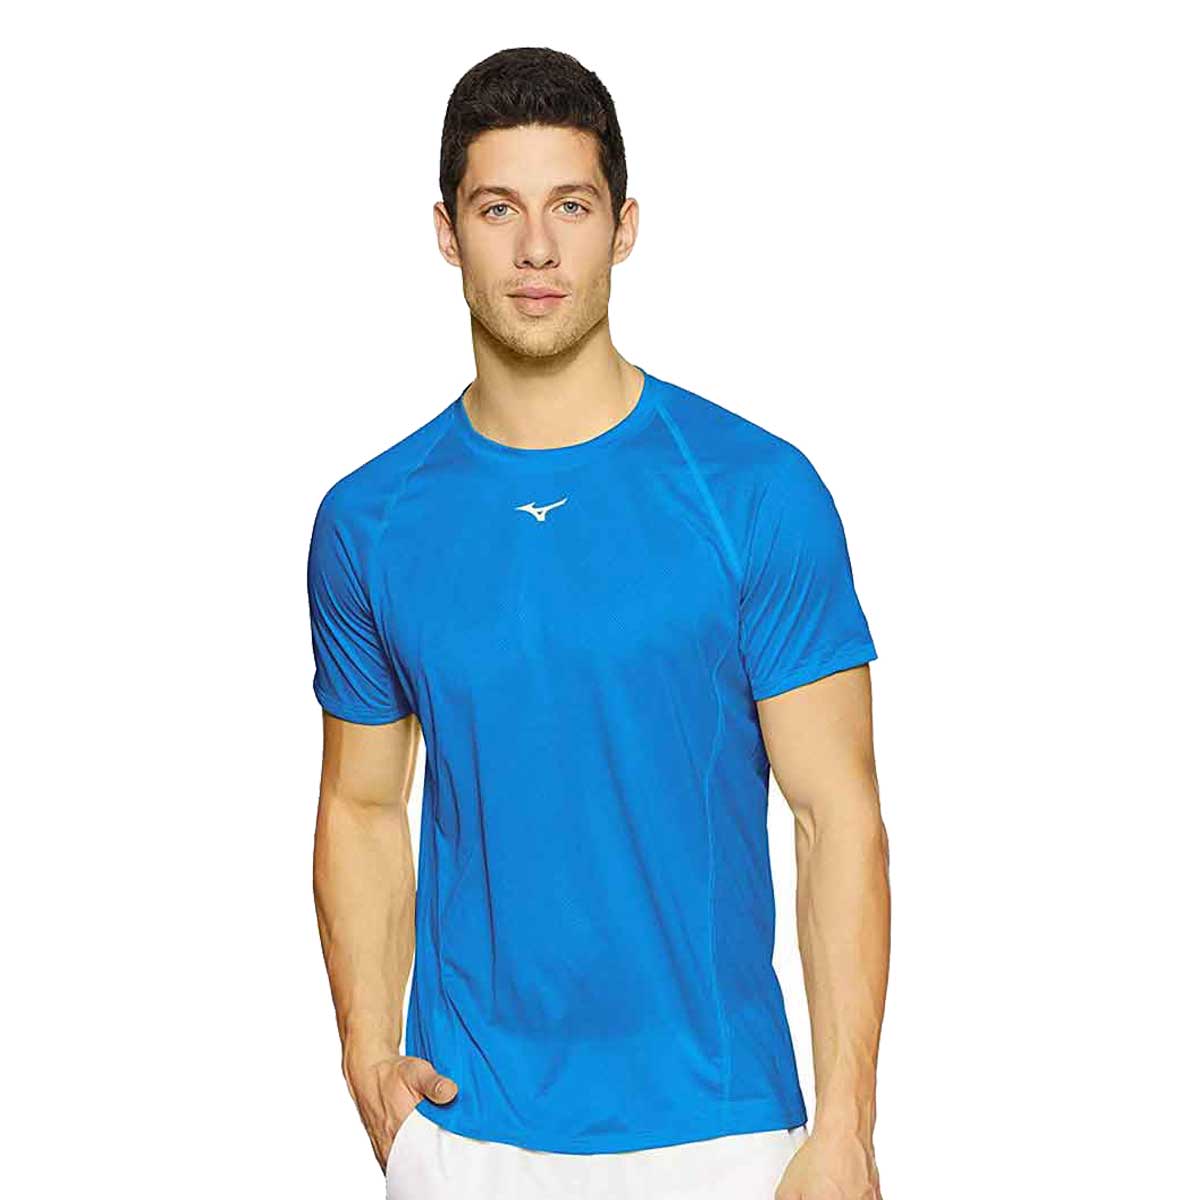 Buy Mizuno Performance Mens T-Shirts Online at Lowest Price in India